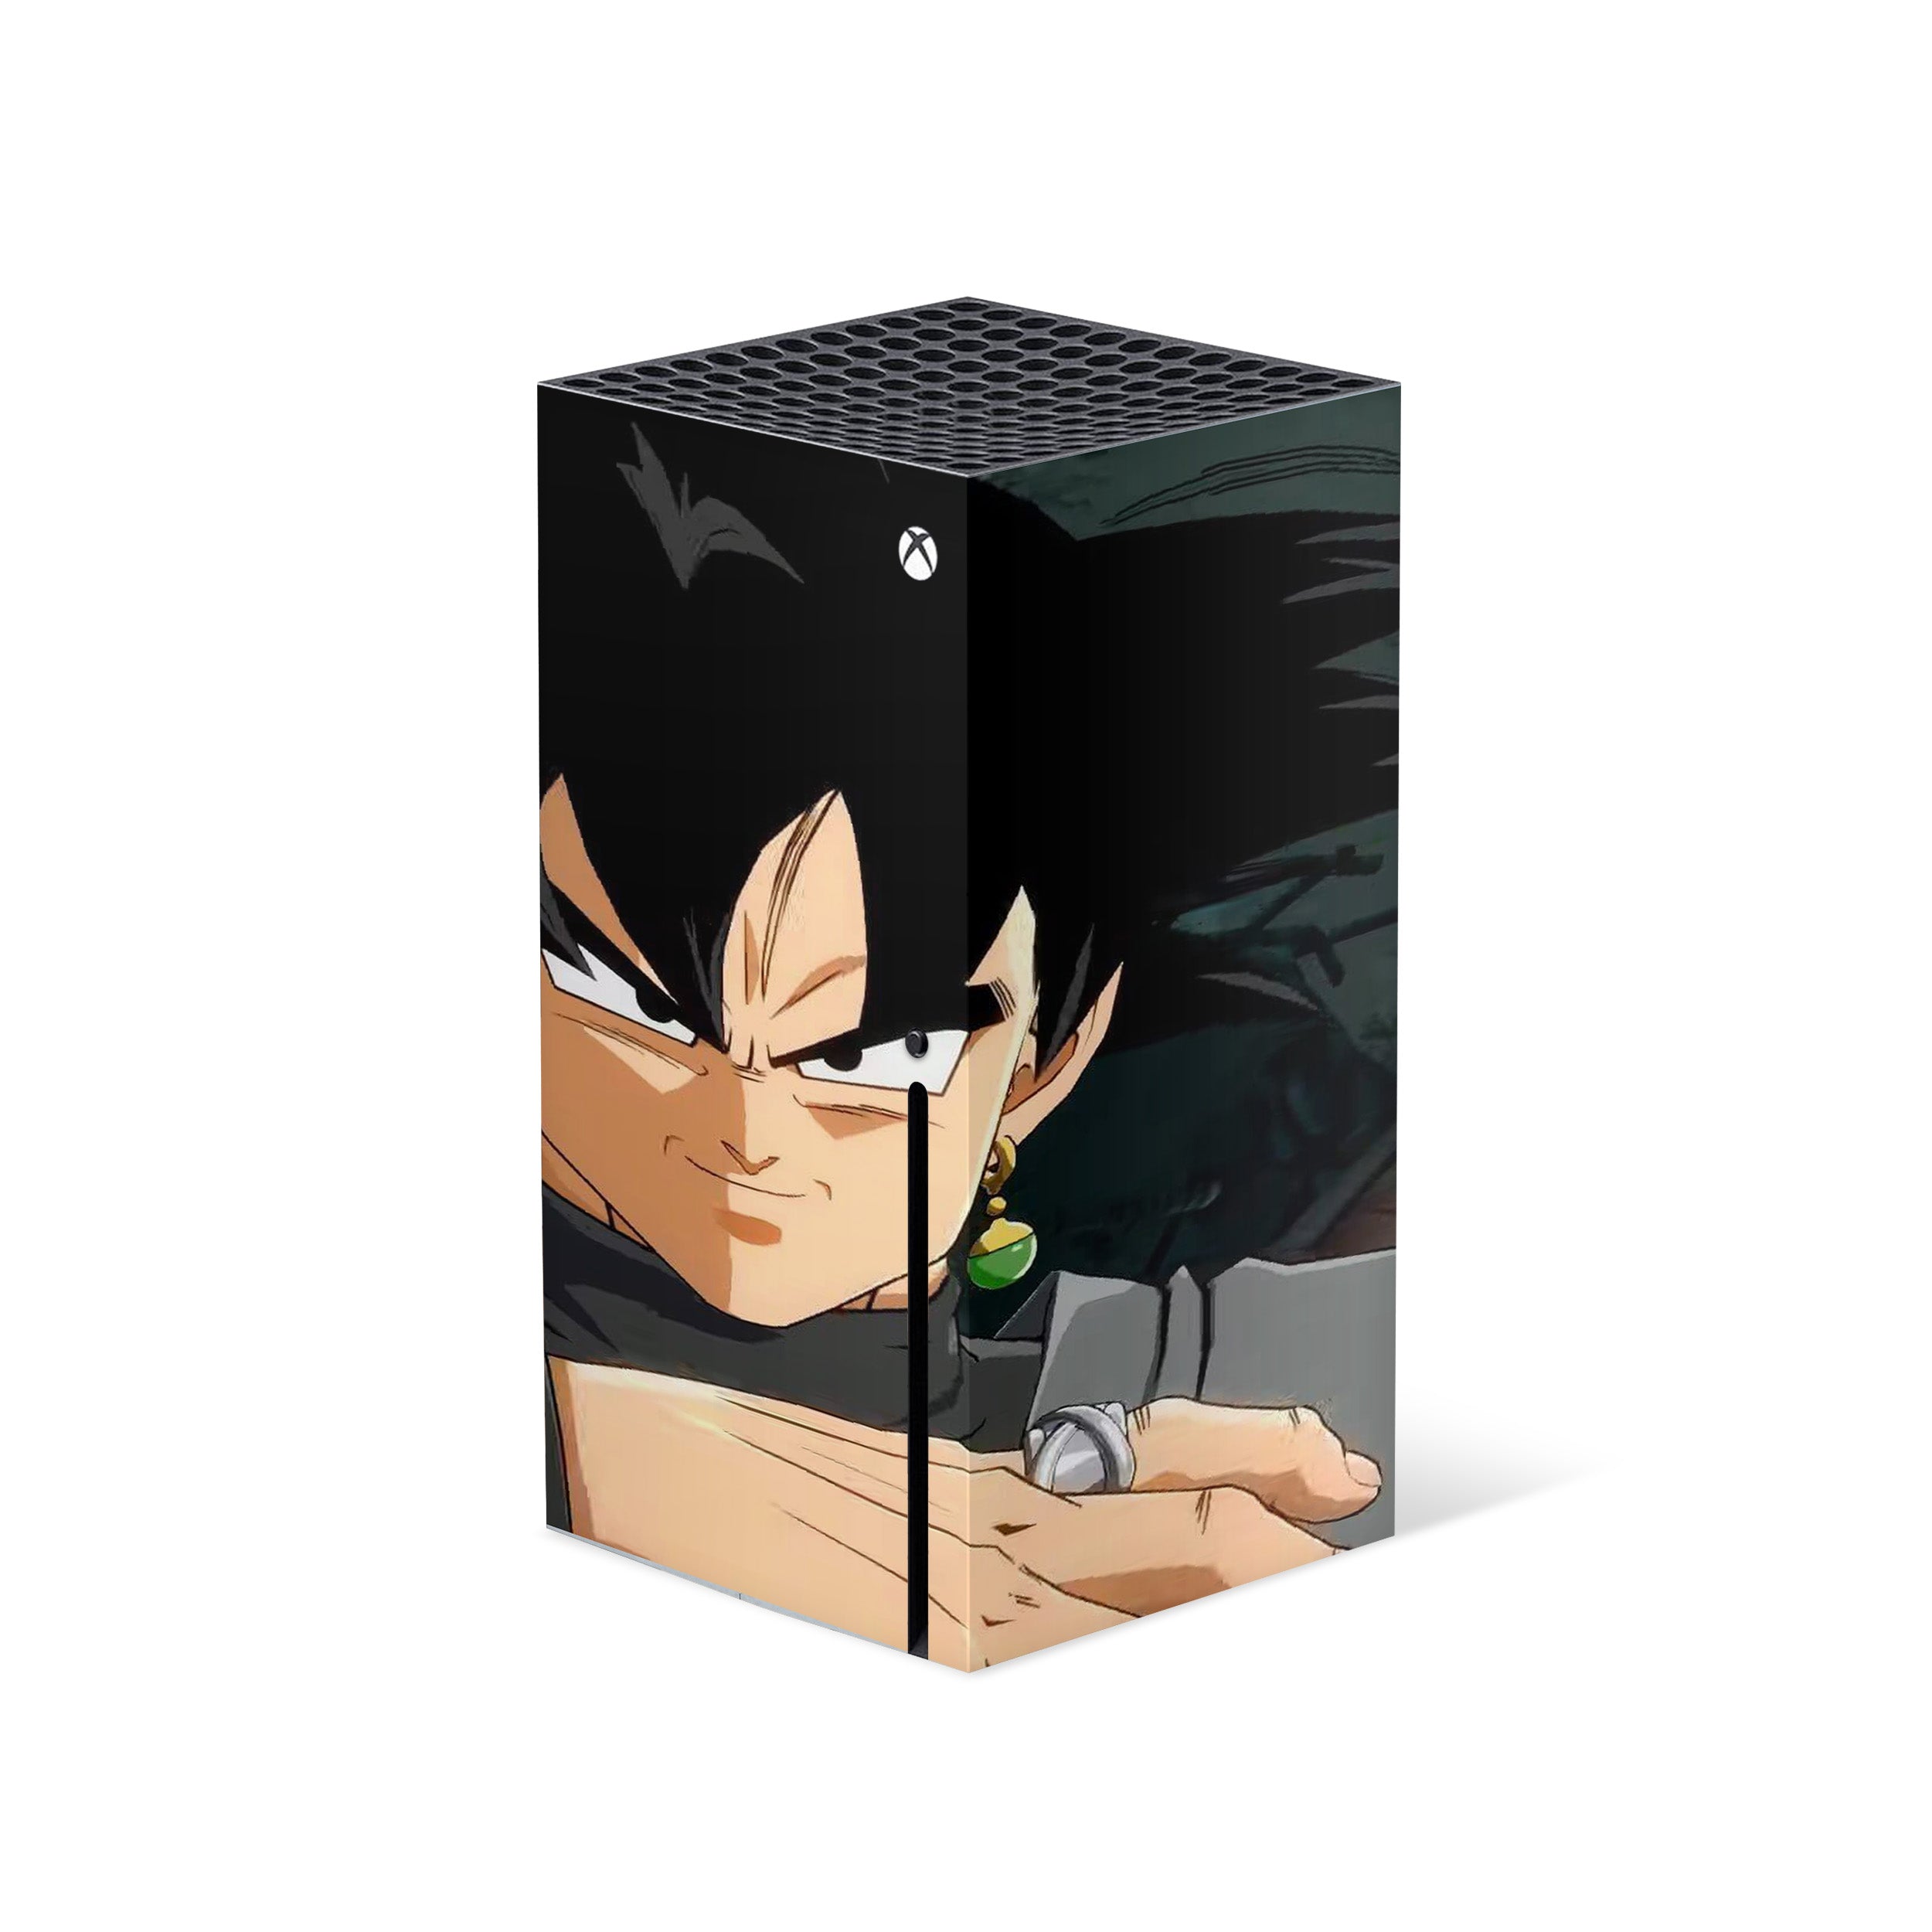 A video game skin featuring a Dragon Ball Fighterz Goku Black design for the Xbox Series X.